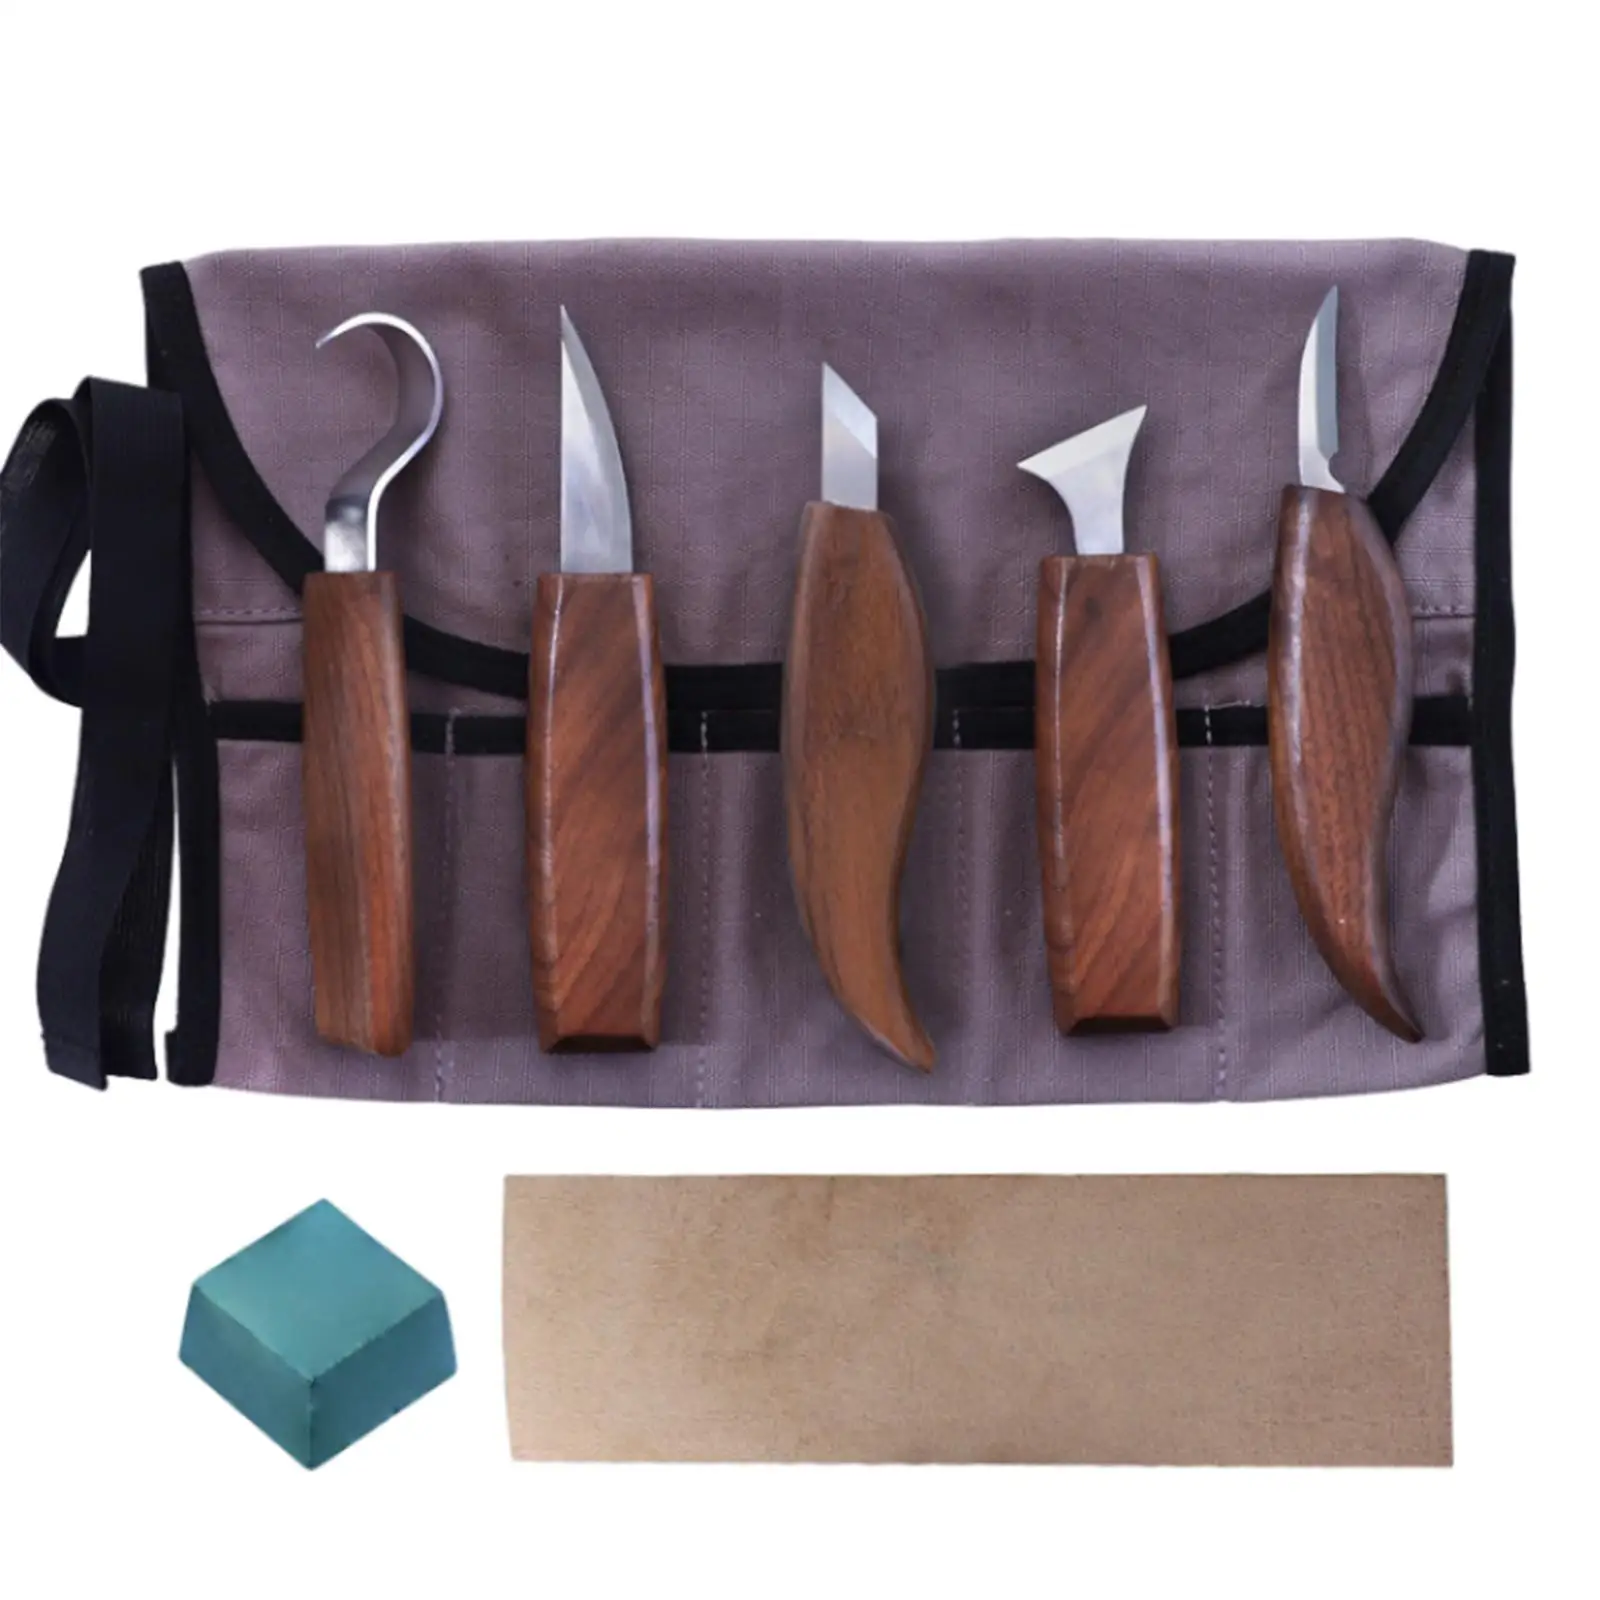 8Pcs Wood Carving Tools Durable Walnut Wood Handle Hand Carving Knife Set for Paper Carving Handmade Wood Carving Fathers Gifts